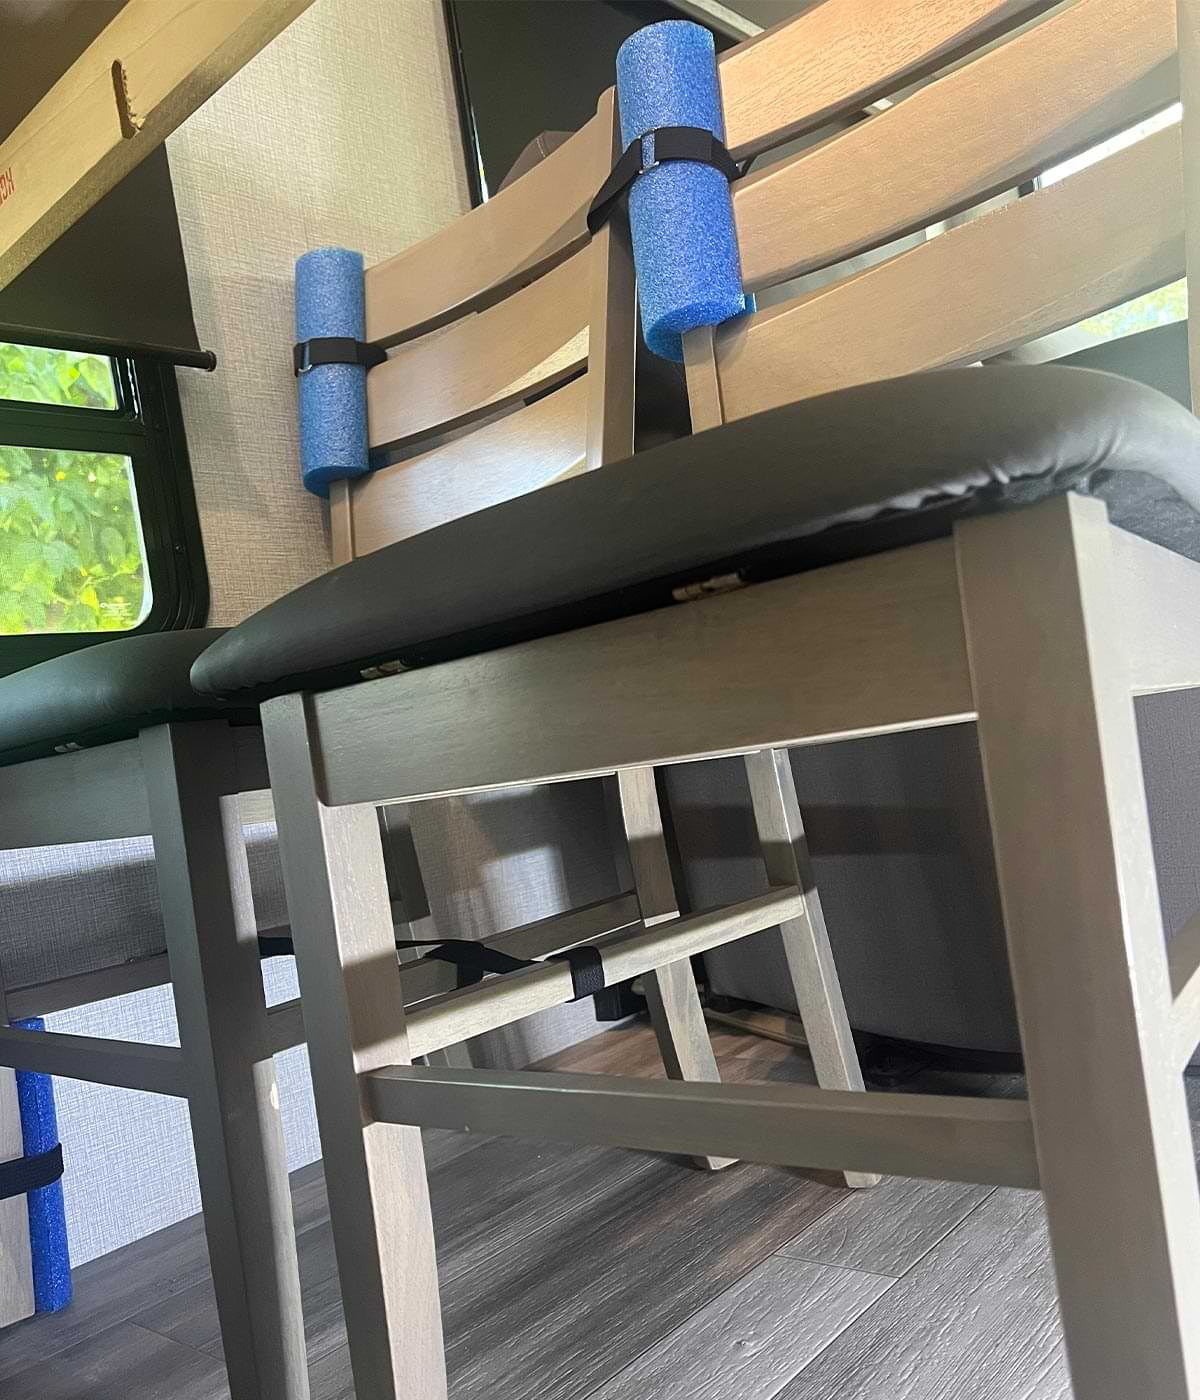 two RV dinette chairs with blue swim noodle pieces protecting the areas where they touch are also secured to the RV wall by a single strap fastened to the Footman Loop